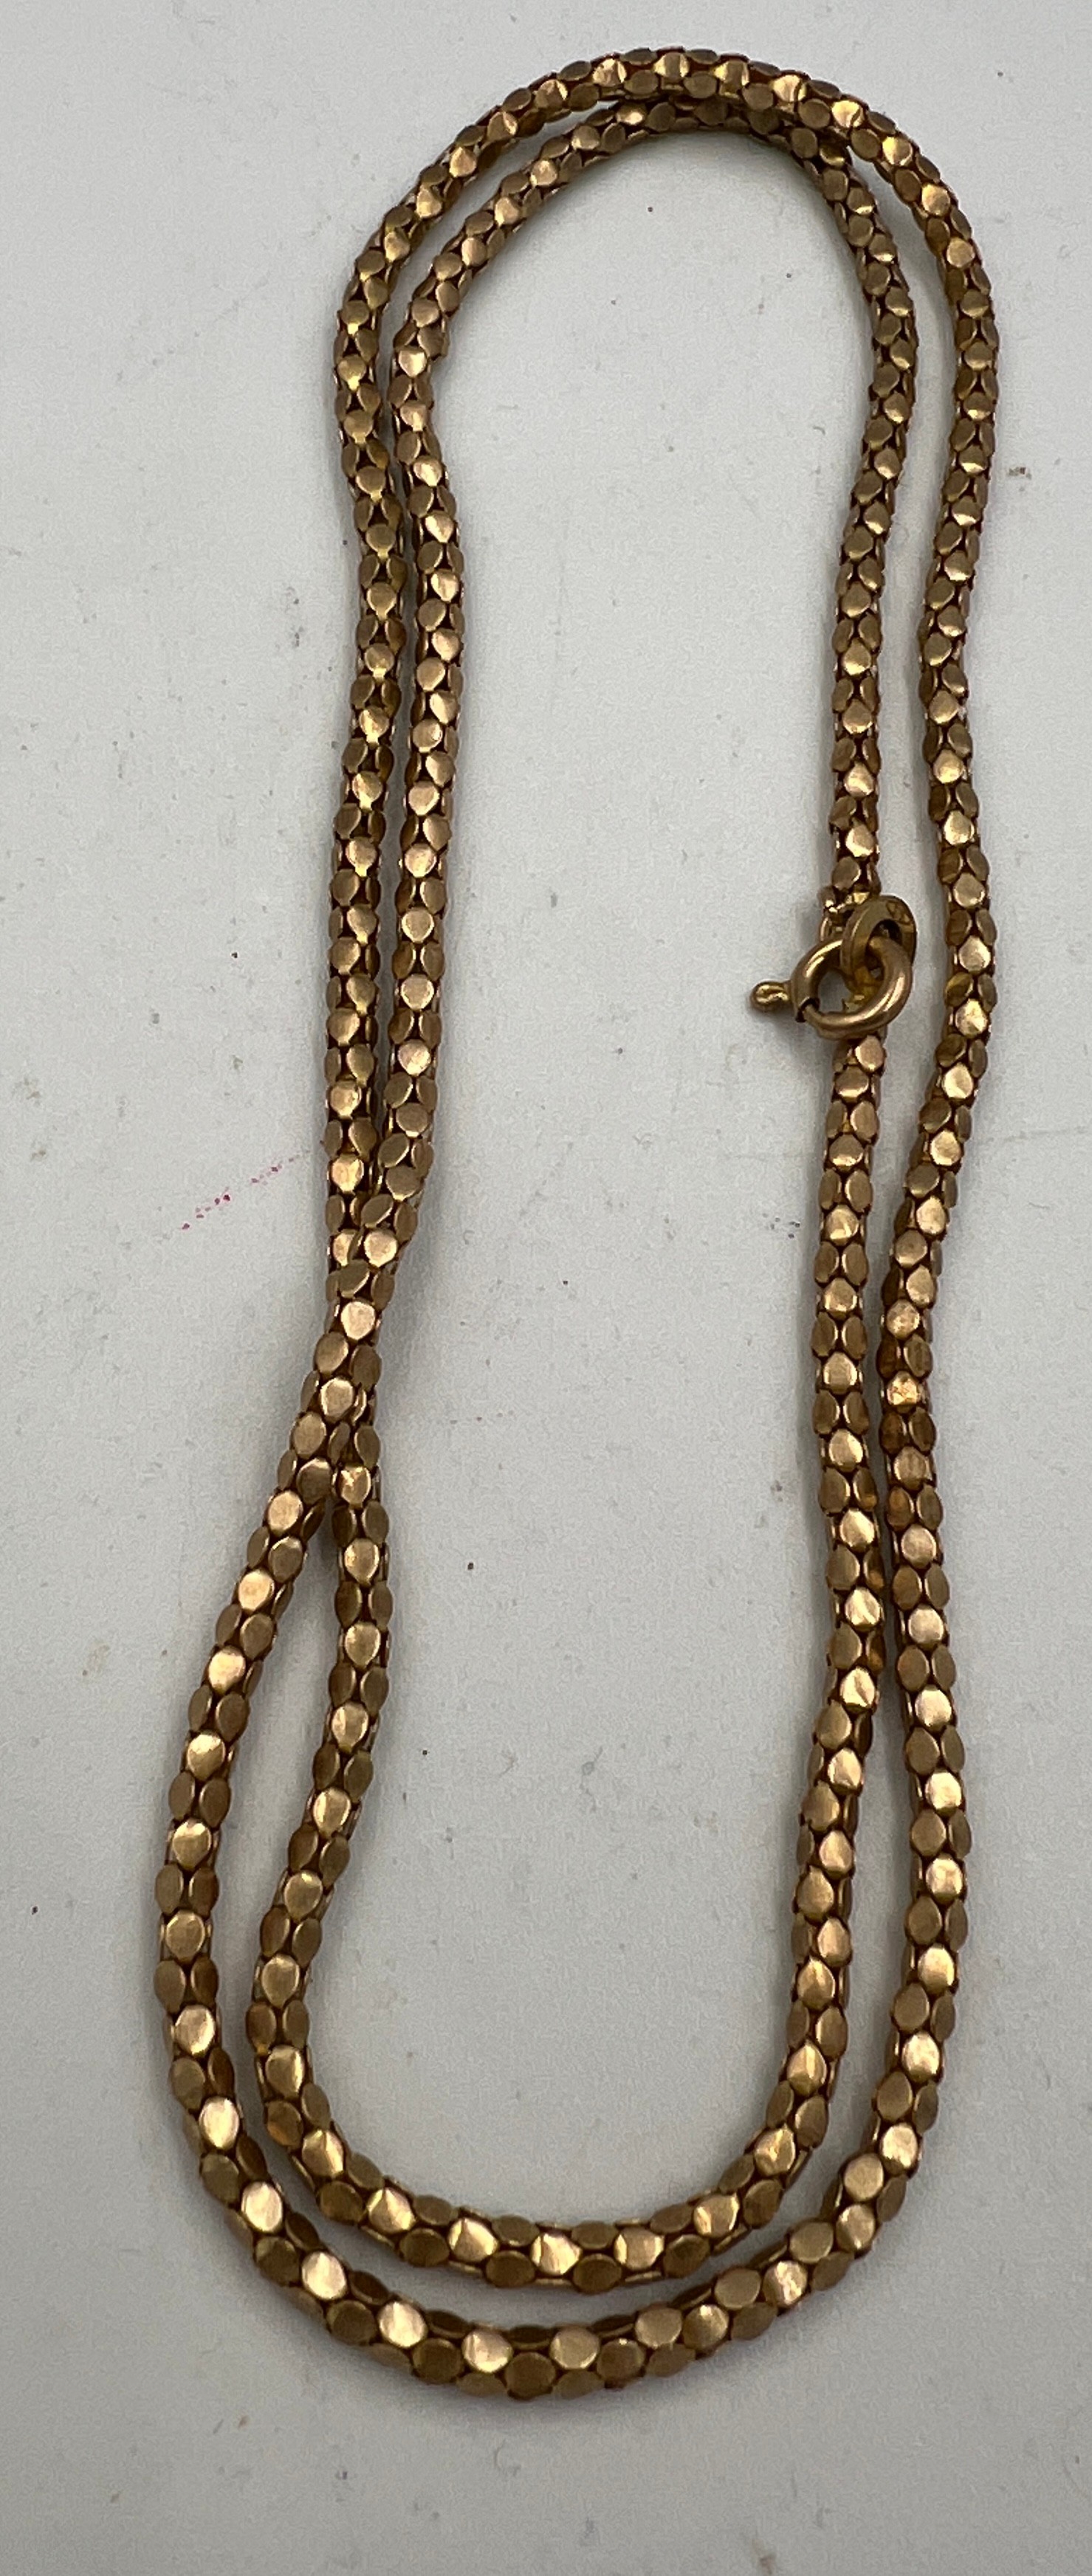 A 9 carat gold chain necklace. Length 52cm. Weight 6.4gm.